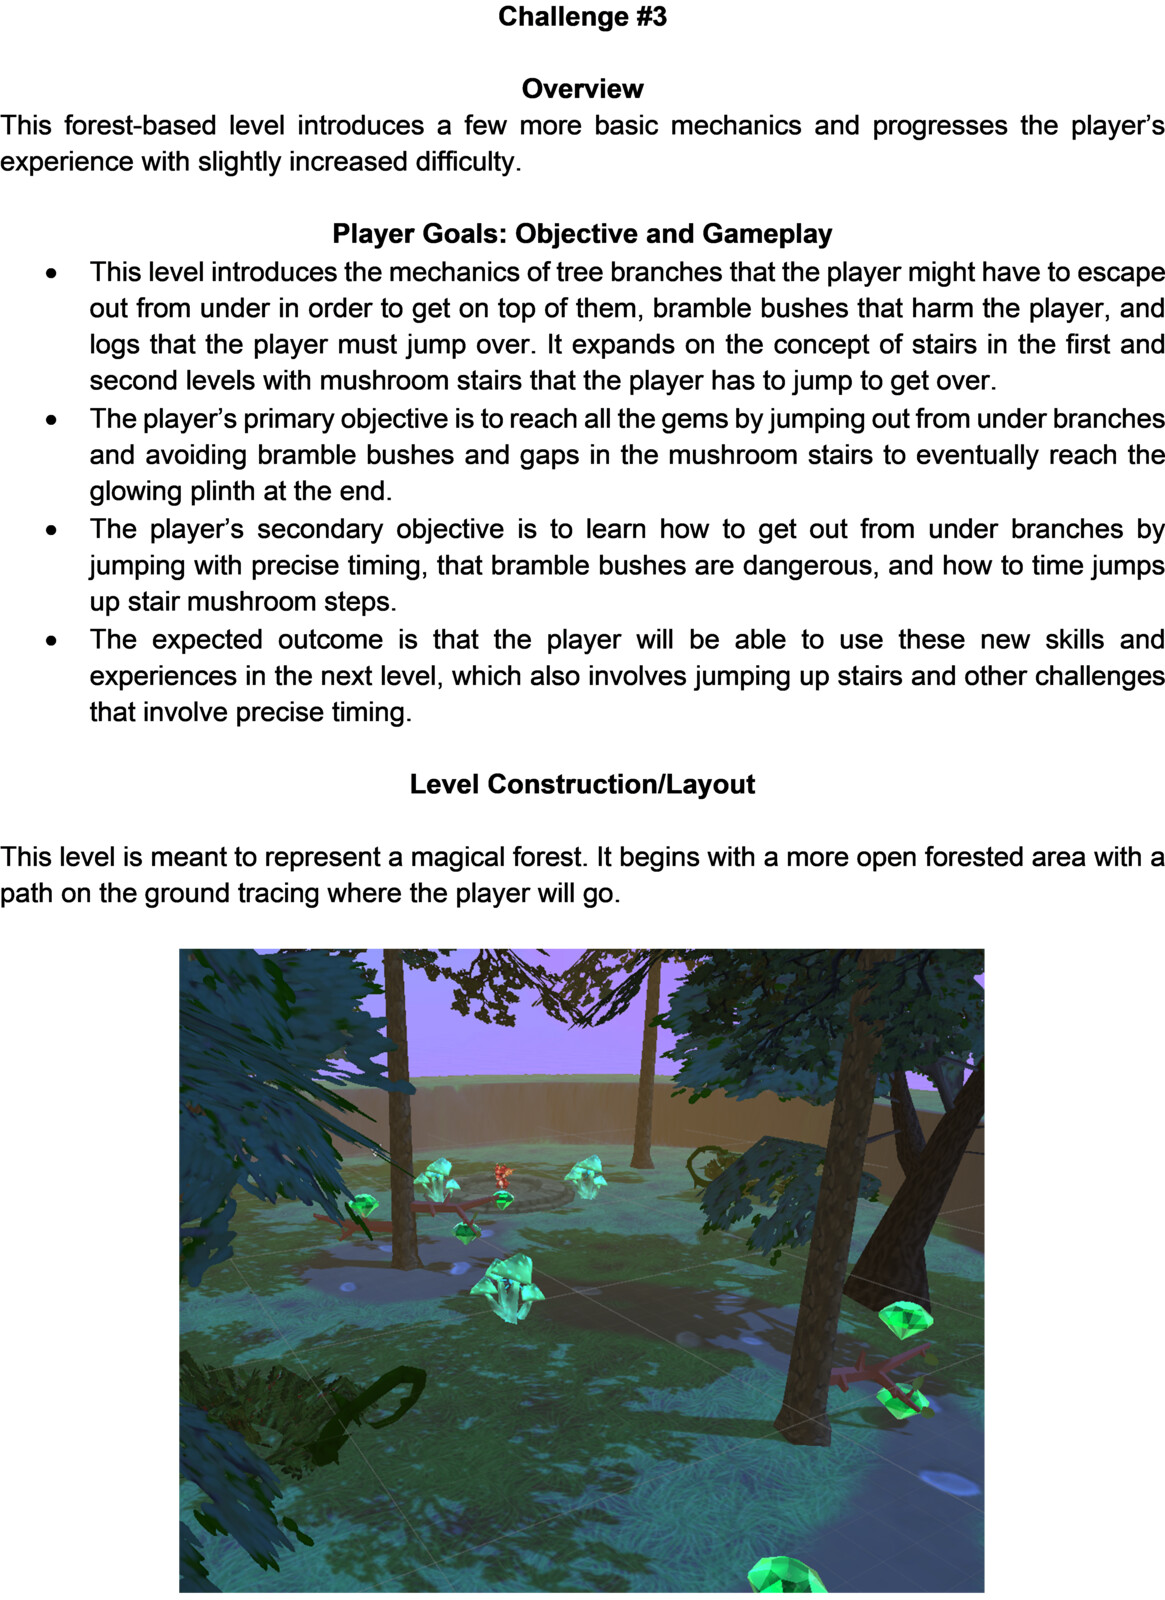 Level 3 Detailed Objective and Construction (page 1 of 4)